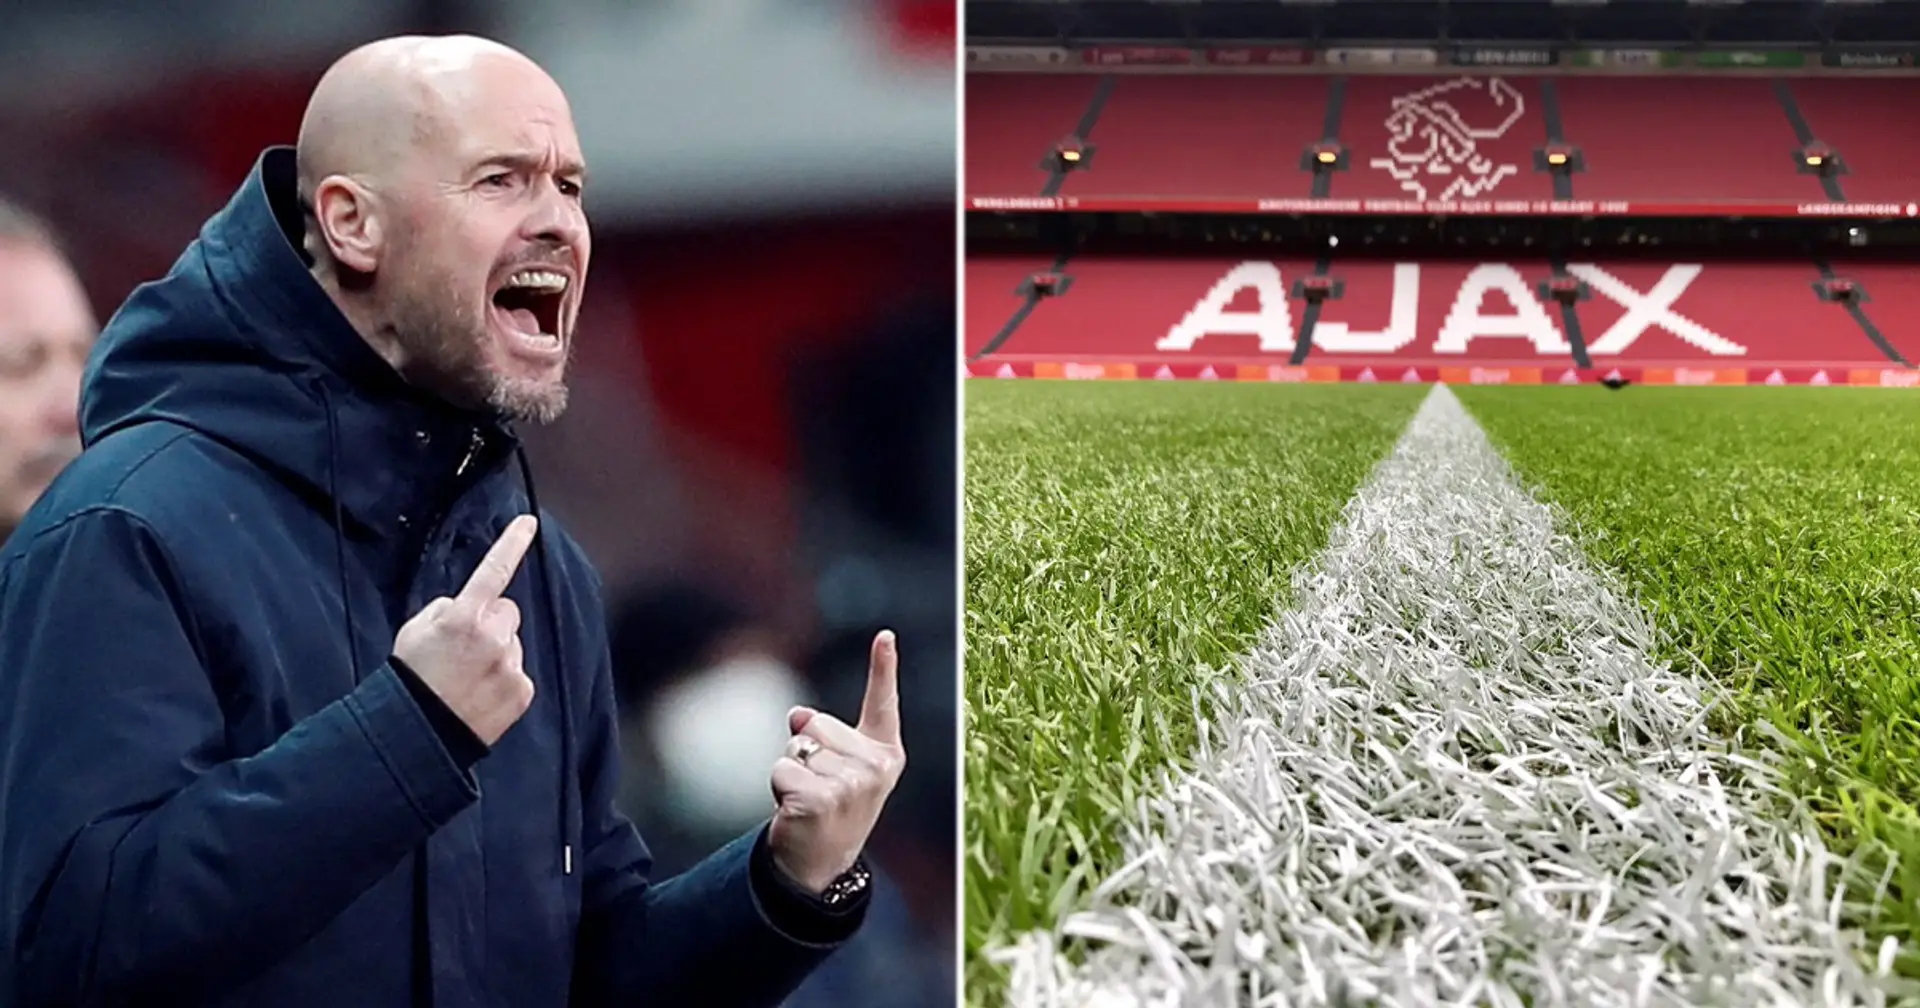 Drinks put out neatly, grass cut down to 2mm: Erik ten Hag's perfectionism described by his former player